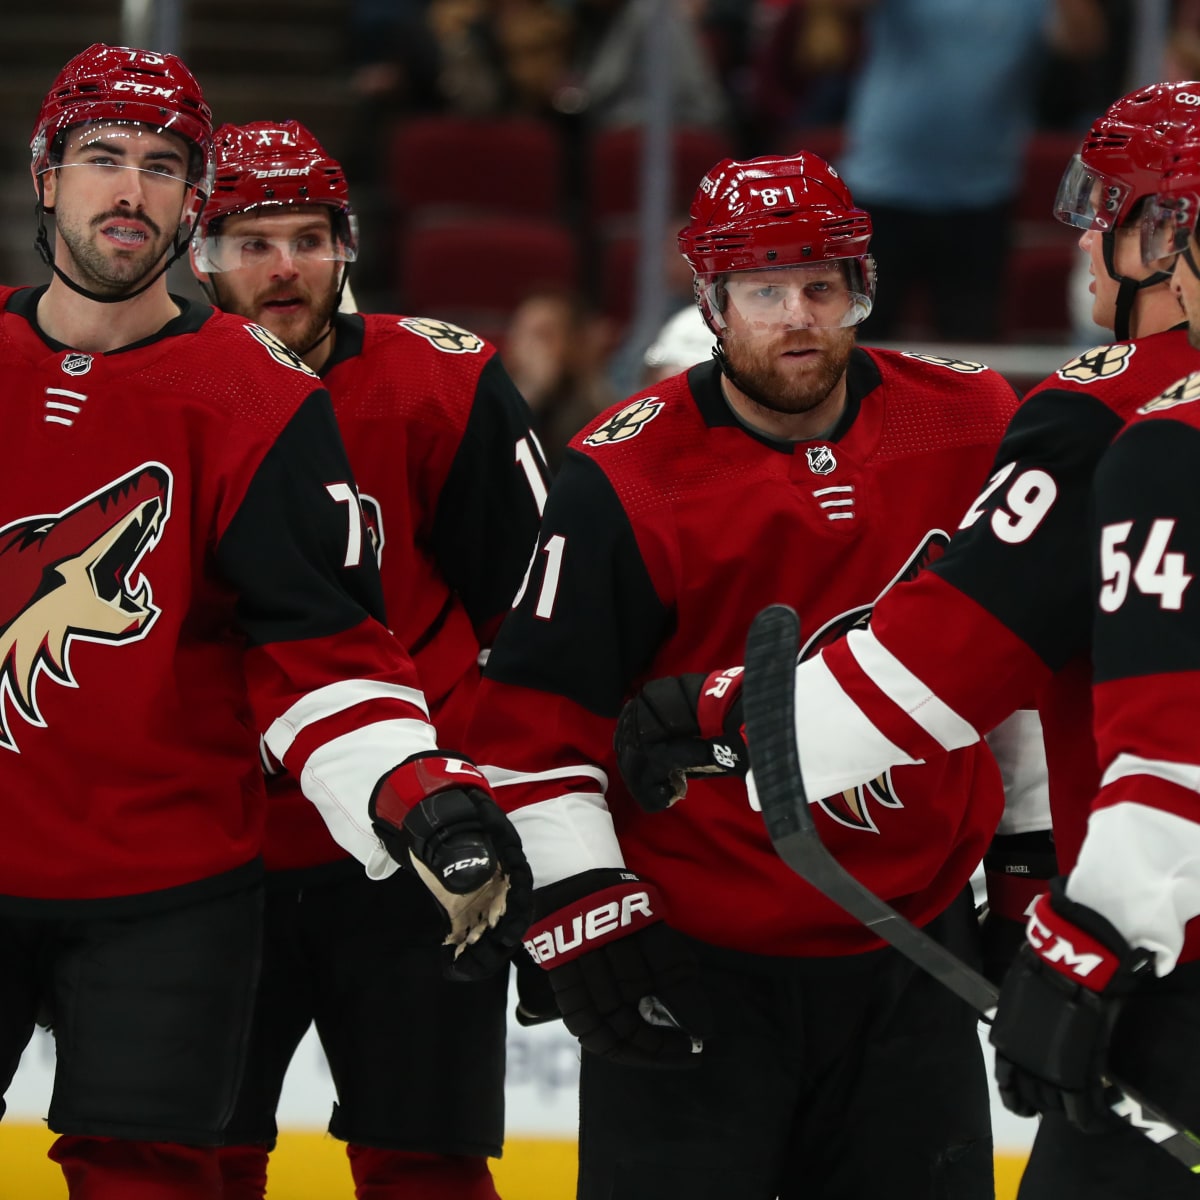 The Arizona Coyotes look to start fresh with a talented young core